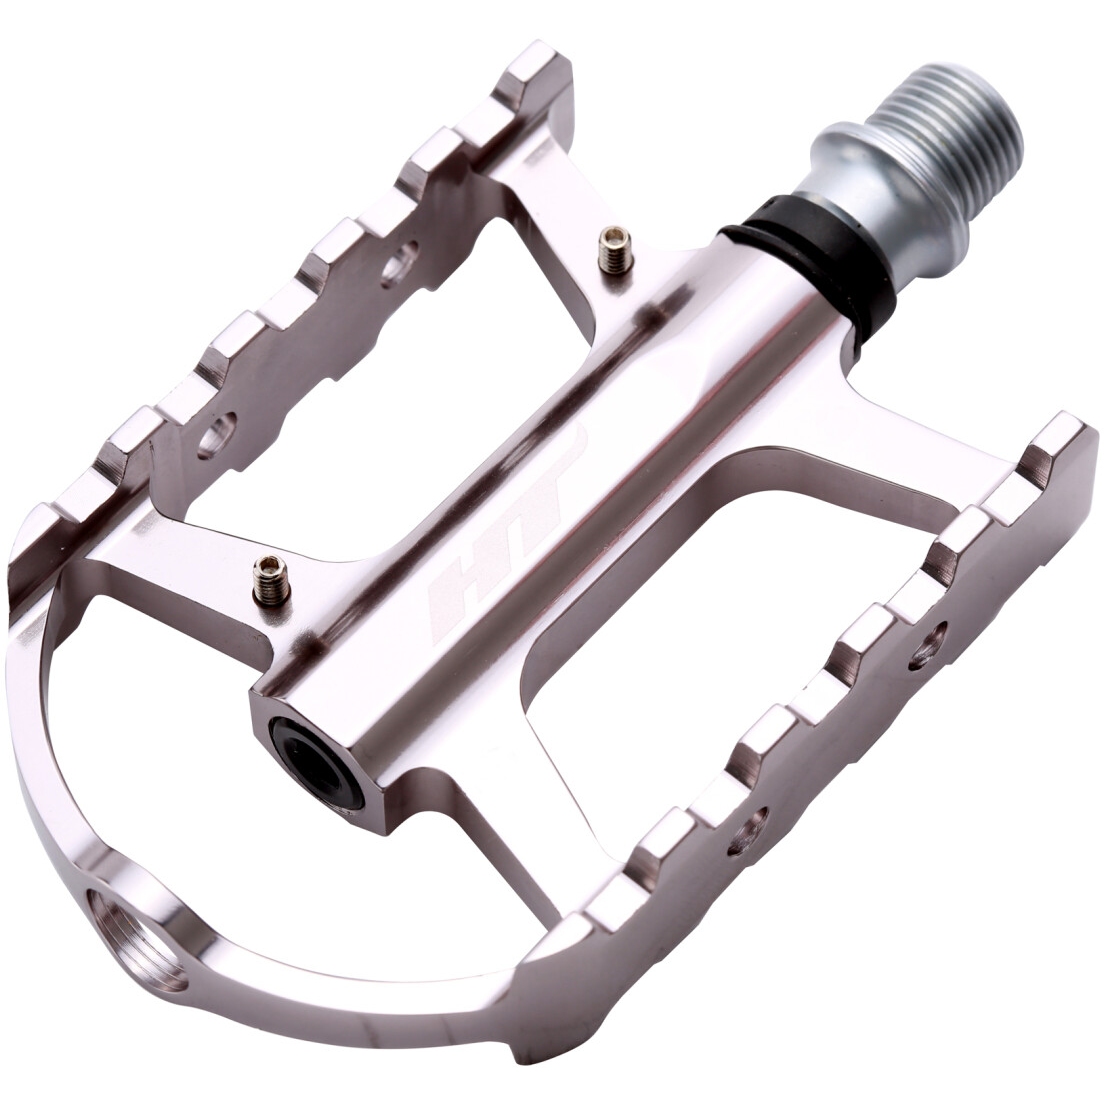 Image of HT ARS02 Cheetah-S Pedals - grey